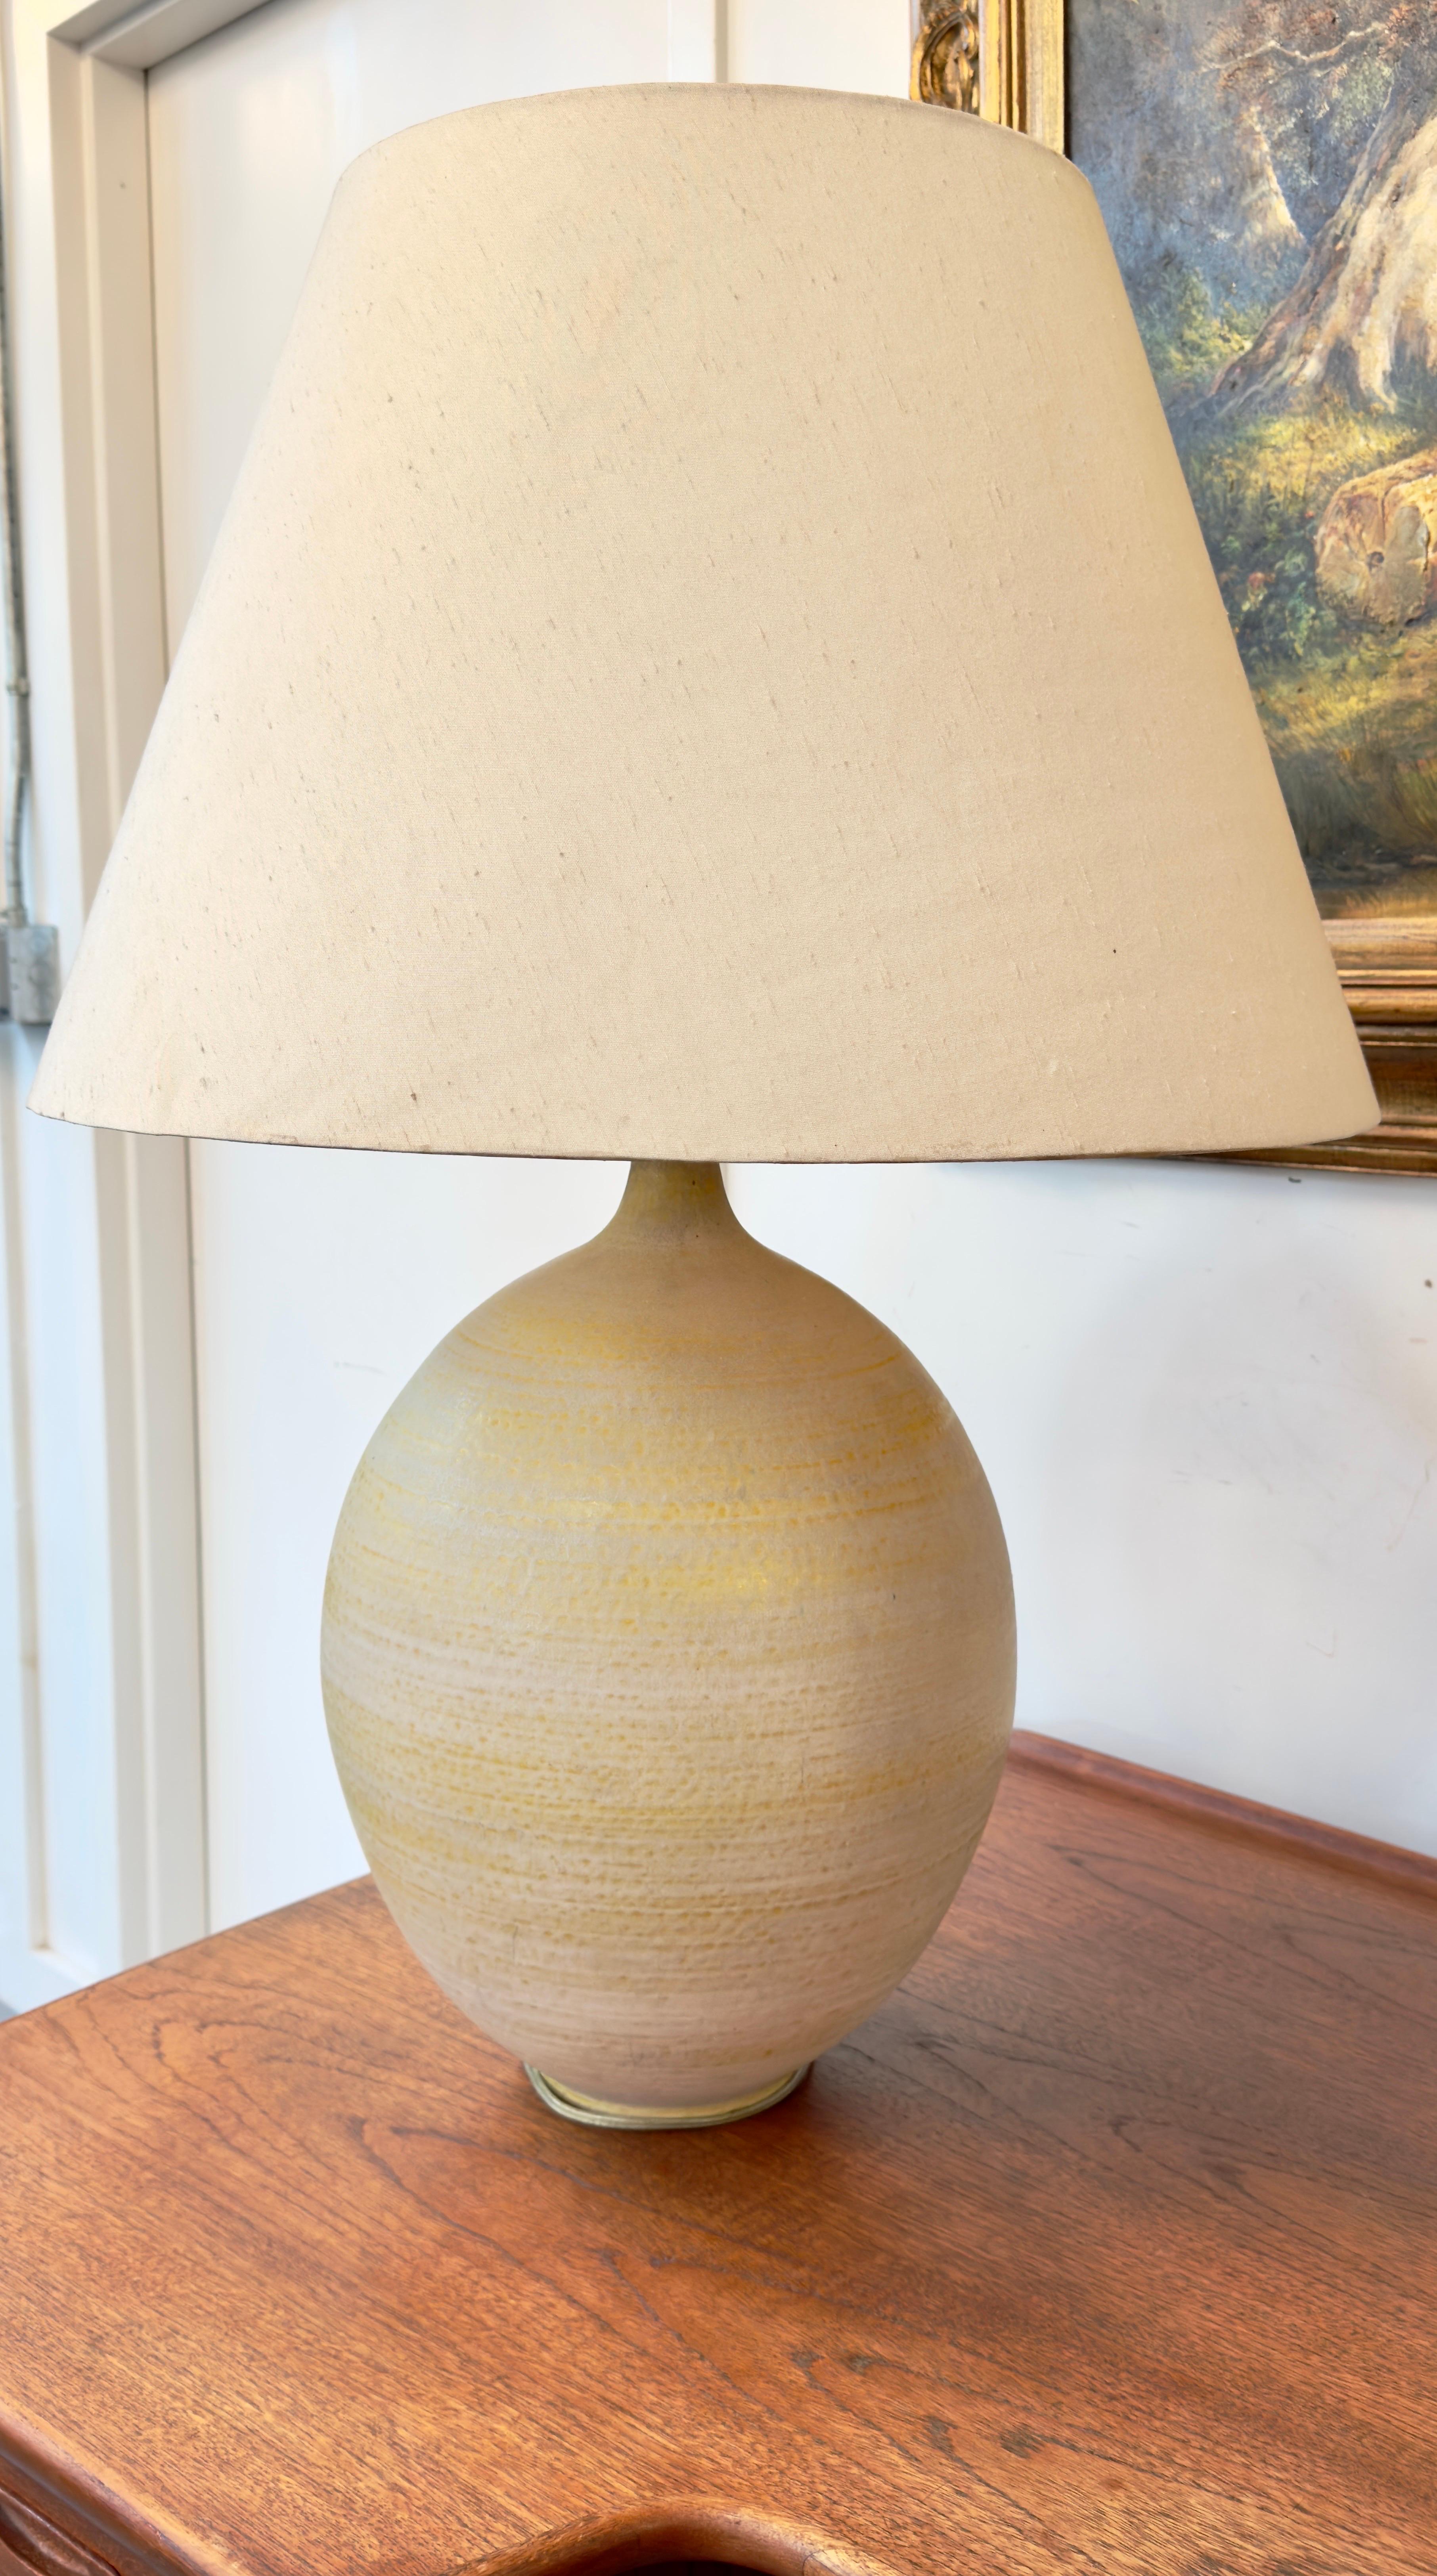 An exquisite Mid Century Modern oversized ceramic table lamp designed by Lee Rosen for Design Technics, N.Y. Distinguished by its generous proportions, this lamp boasts a captivating array of neutral hues, intricately layered to evoke a sense of